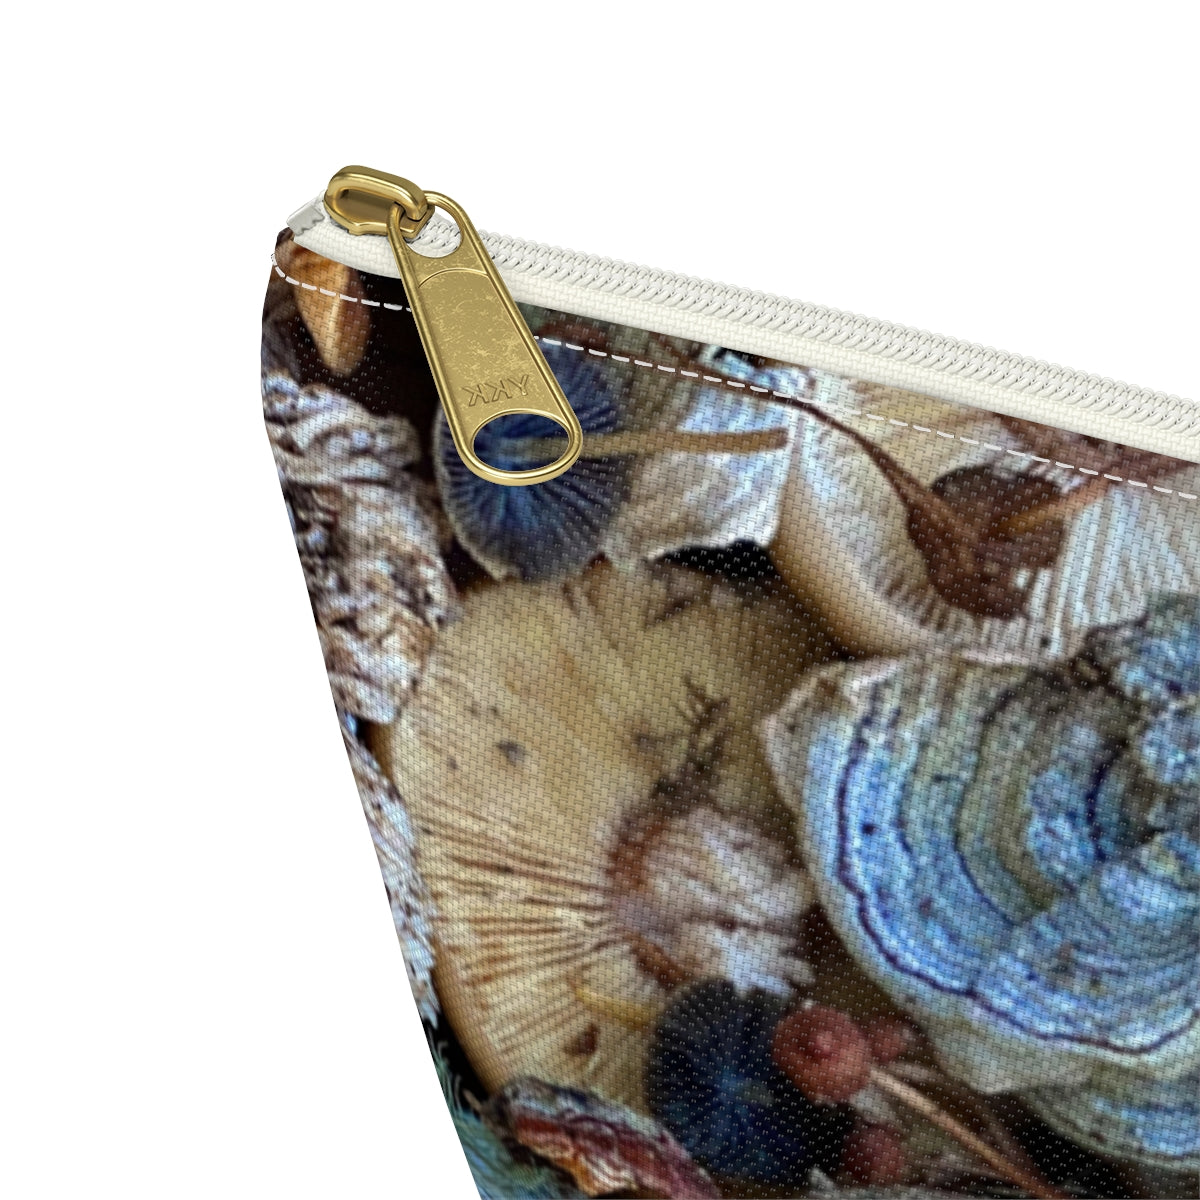 Mushroom Collage Accessory Pouch